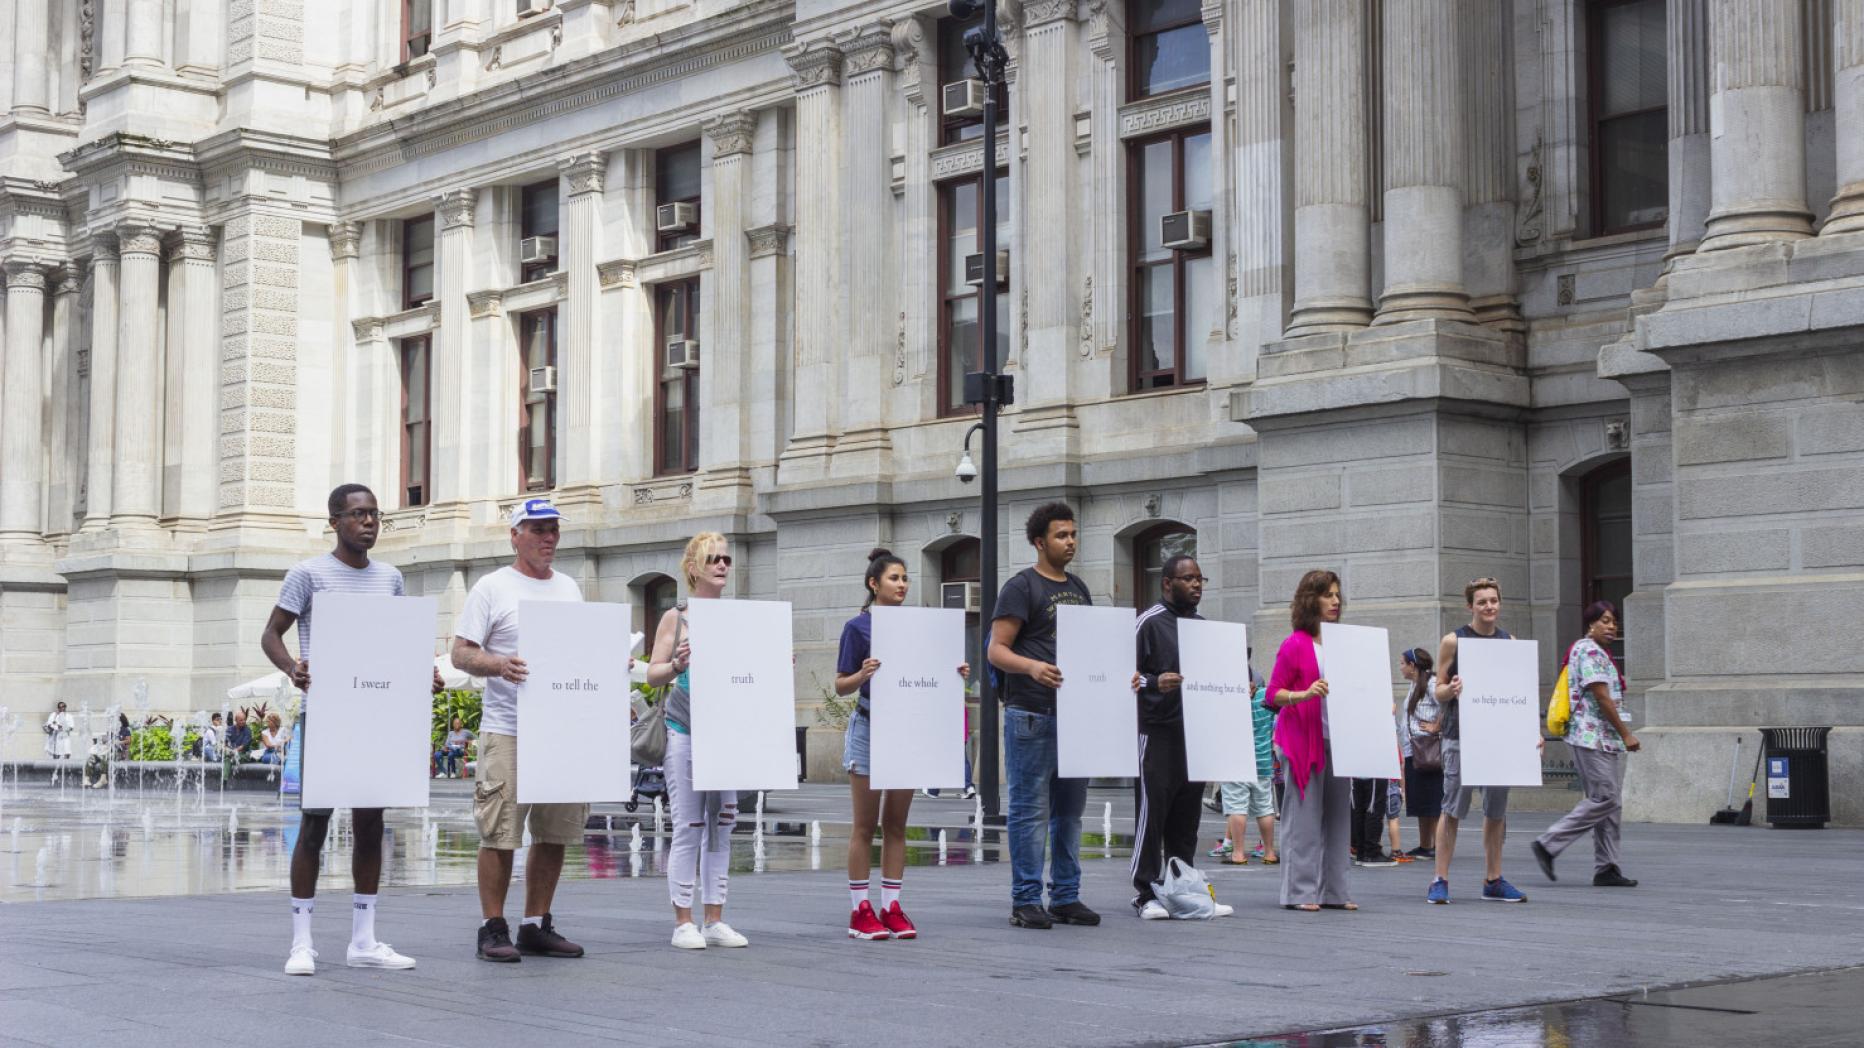 8 people standing in front of a reflecting pool, each holding a white poster board sign.